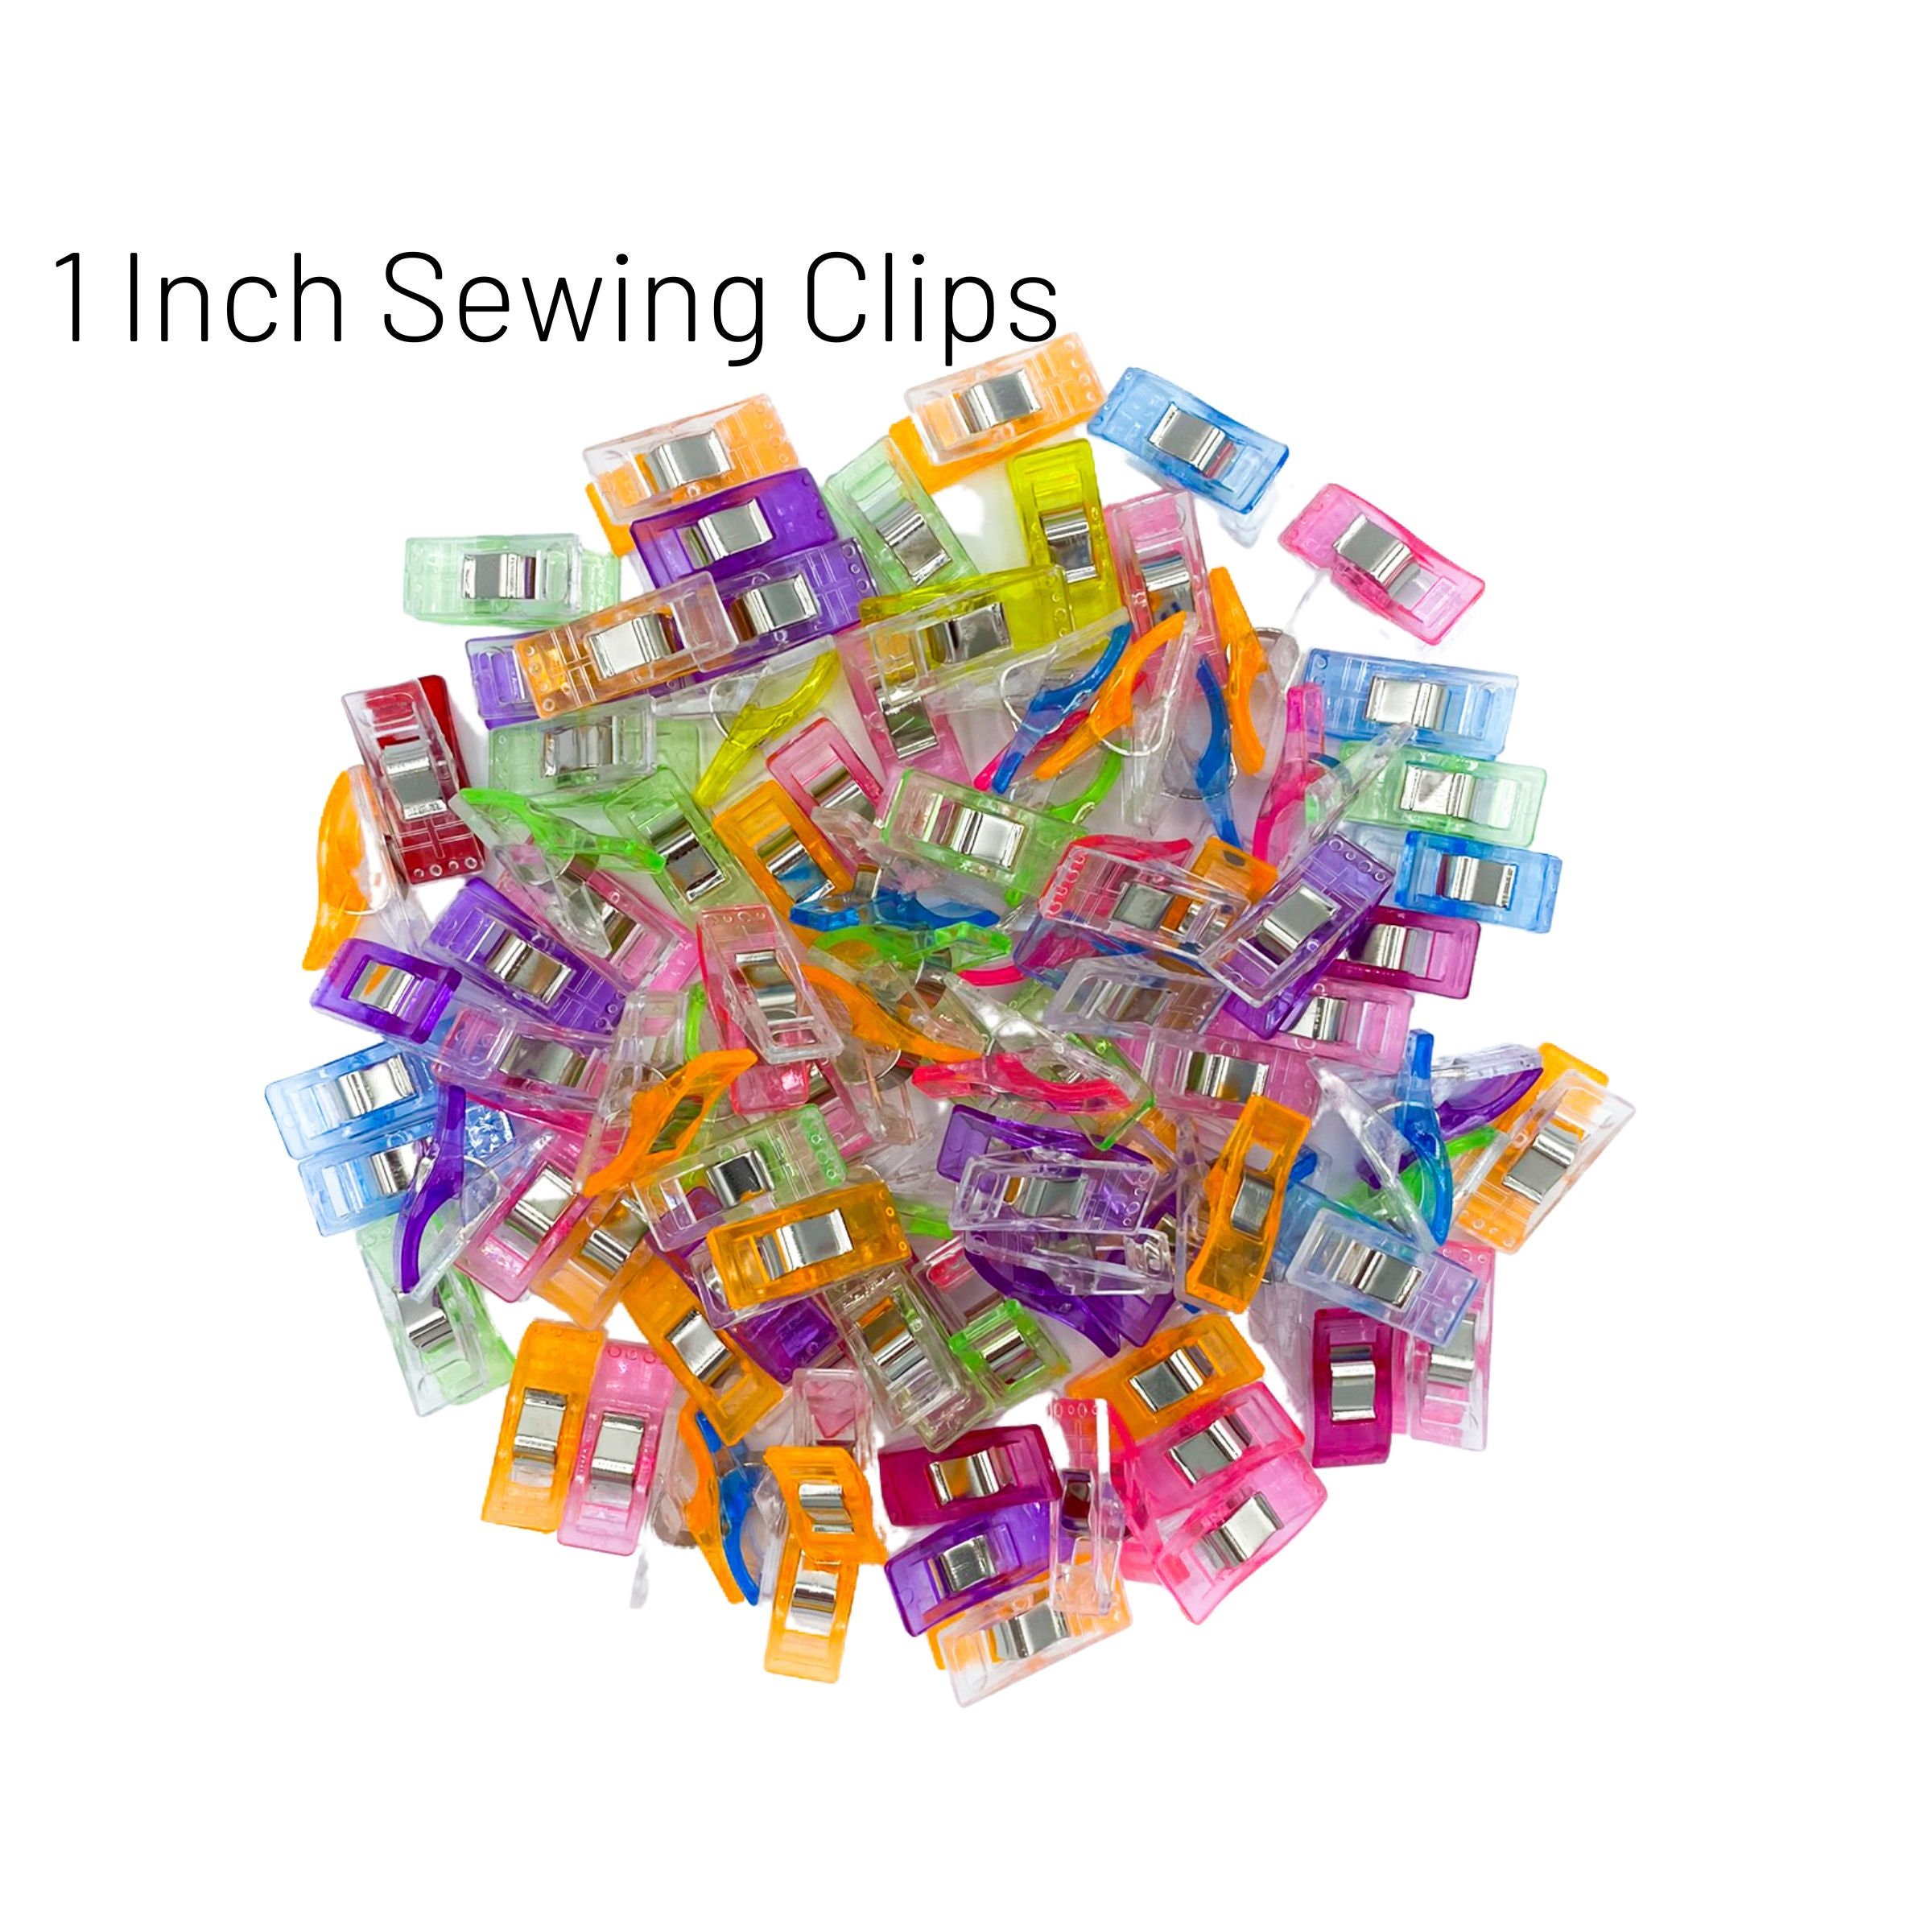 Quilting Clips and Sewing Fabric Clips,Pack of 100,80 Small +20 Middle  Quilt Clips Perfect for Sewing Binding,Crafts,Paper Work and Hanging Little